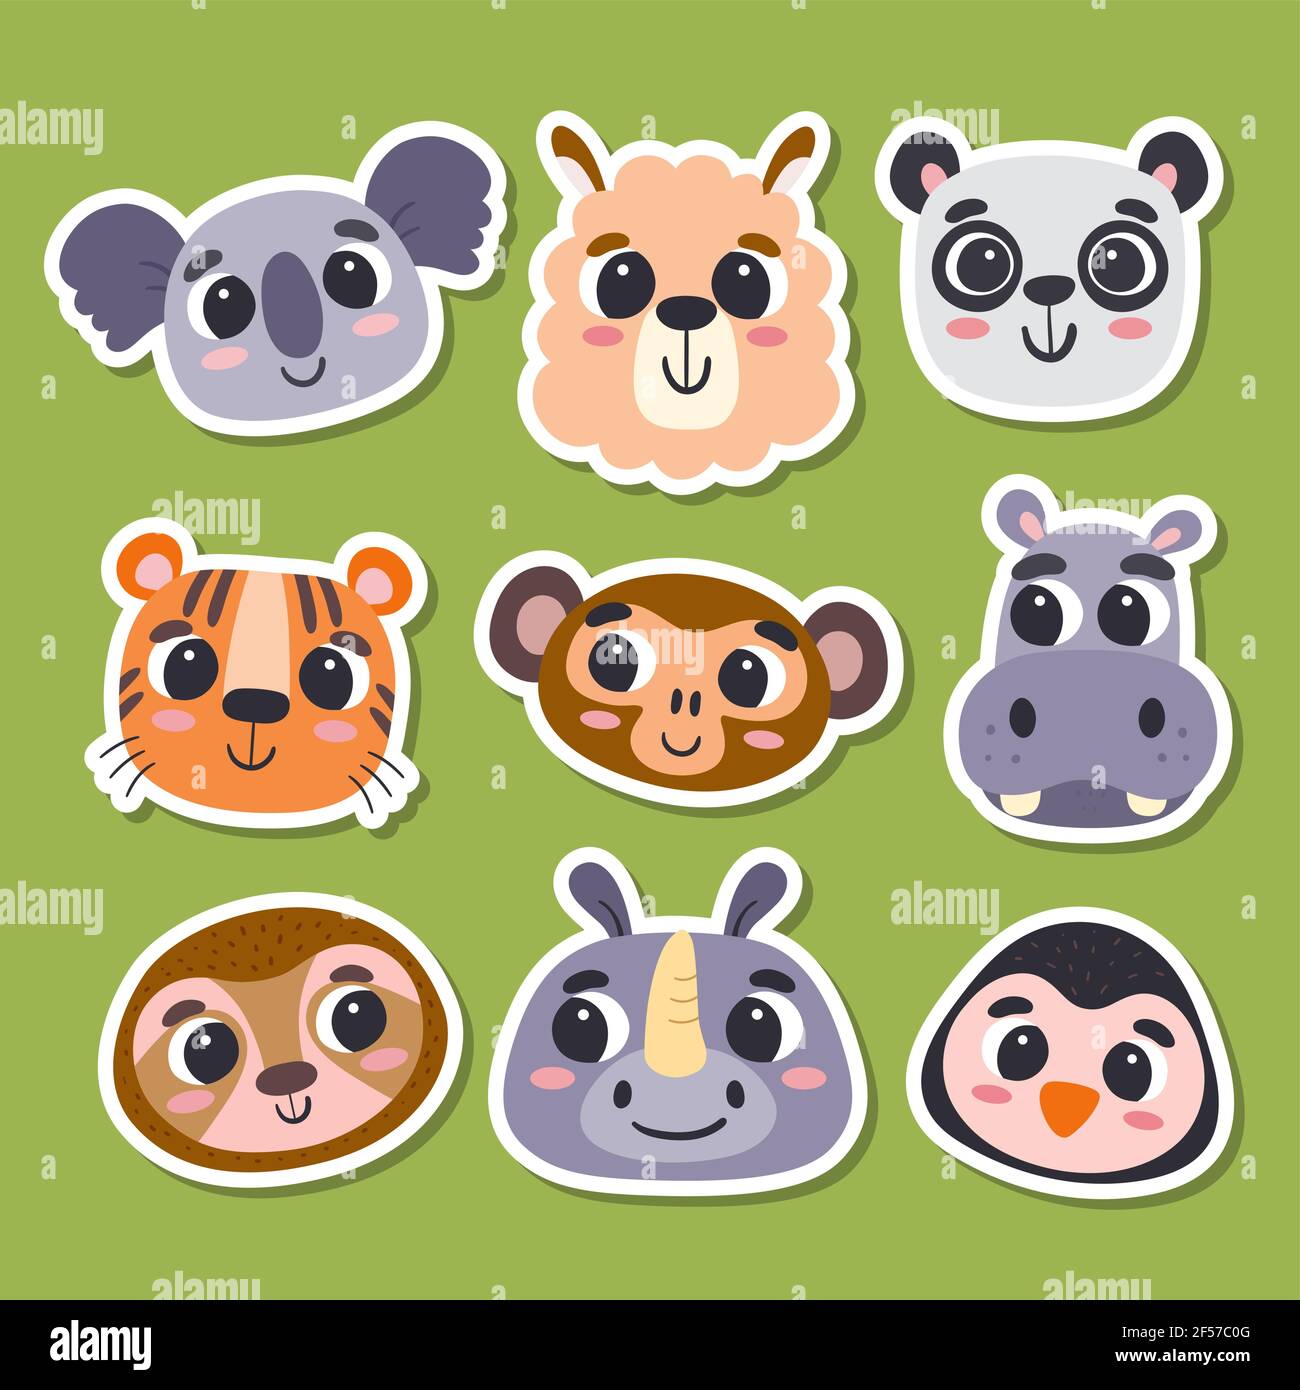 Animal stickers in cartoon style. Collection of cute wild animal